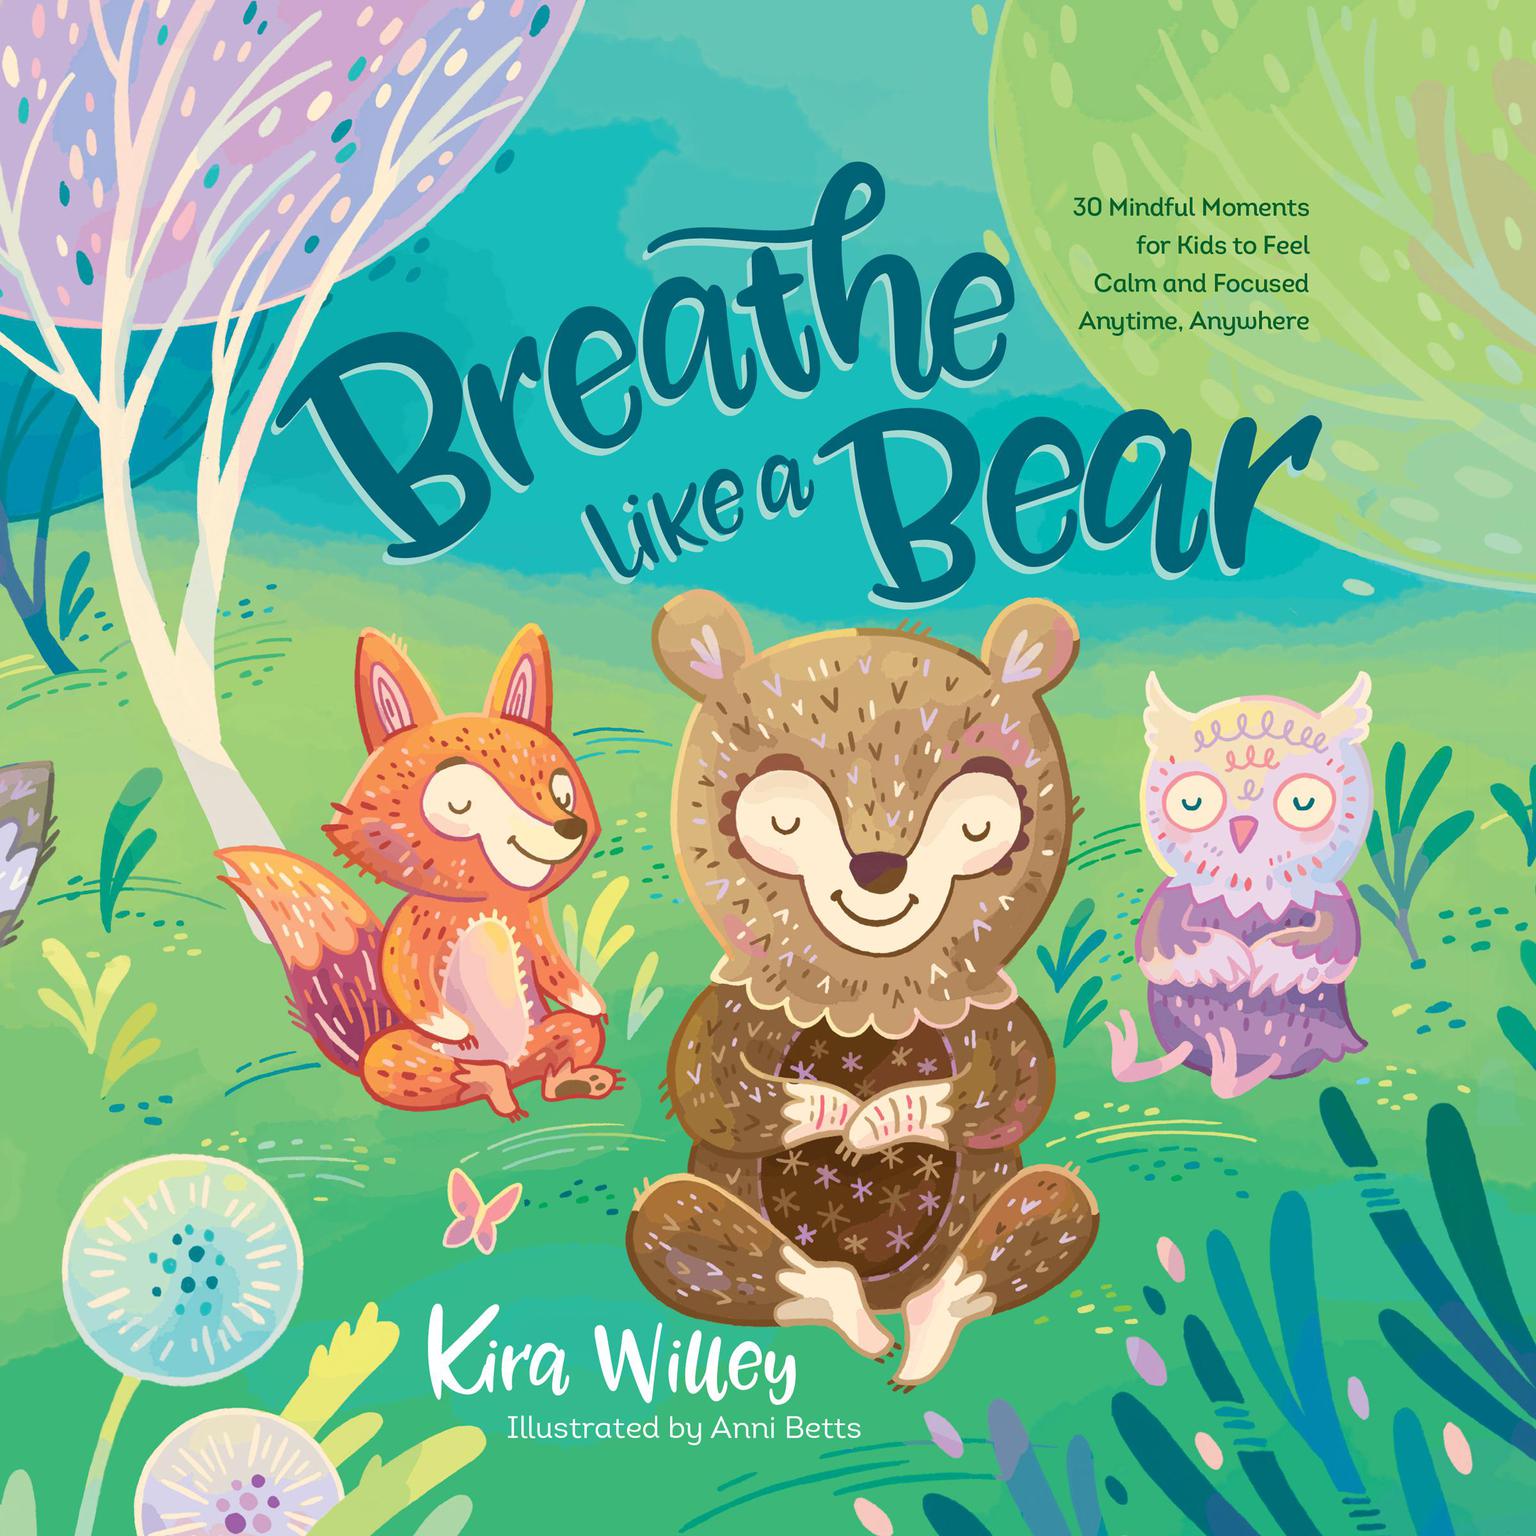 Breathe Like a Bear: 30 Mindful Moments for Kids to Feel Calm and Focused Anytime, Anywhere Audiobook, by Kira Willey